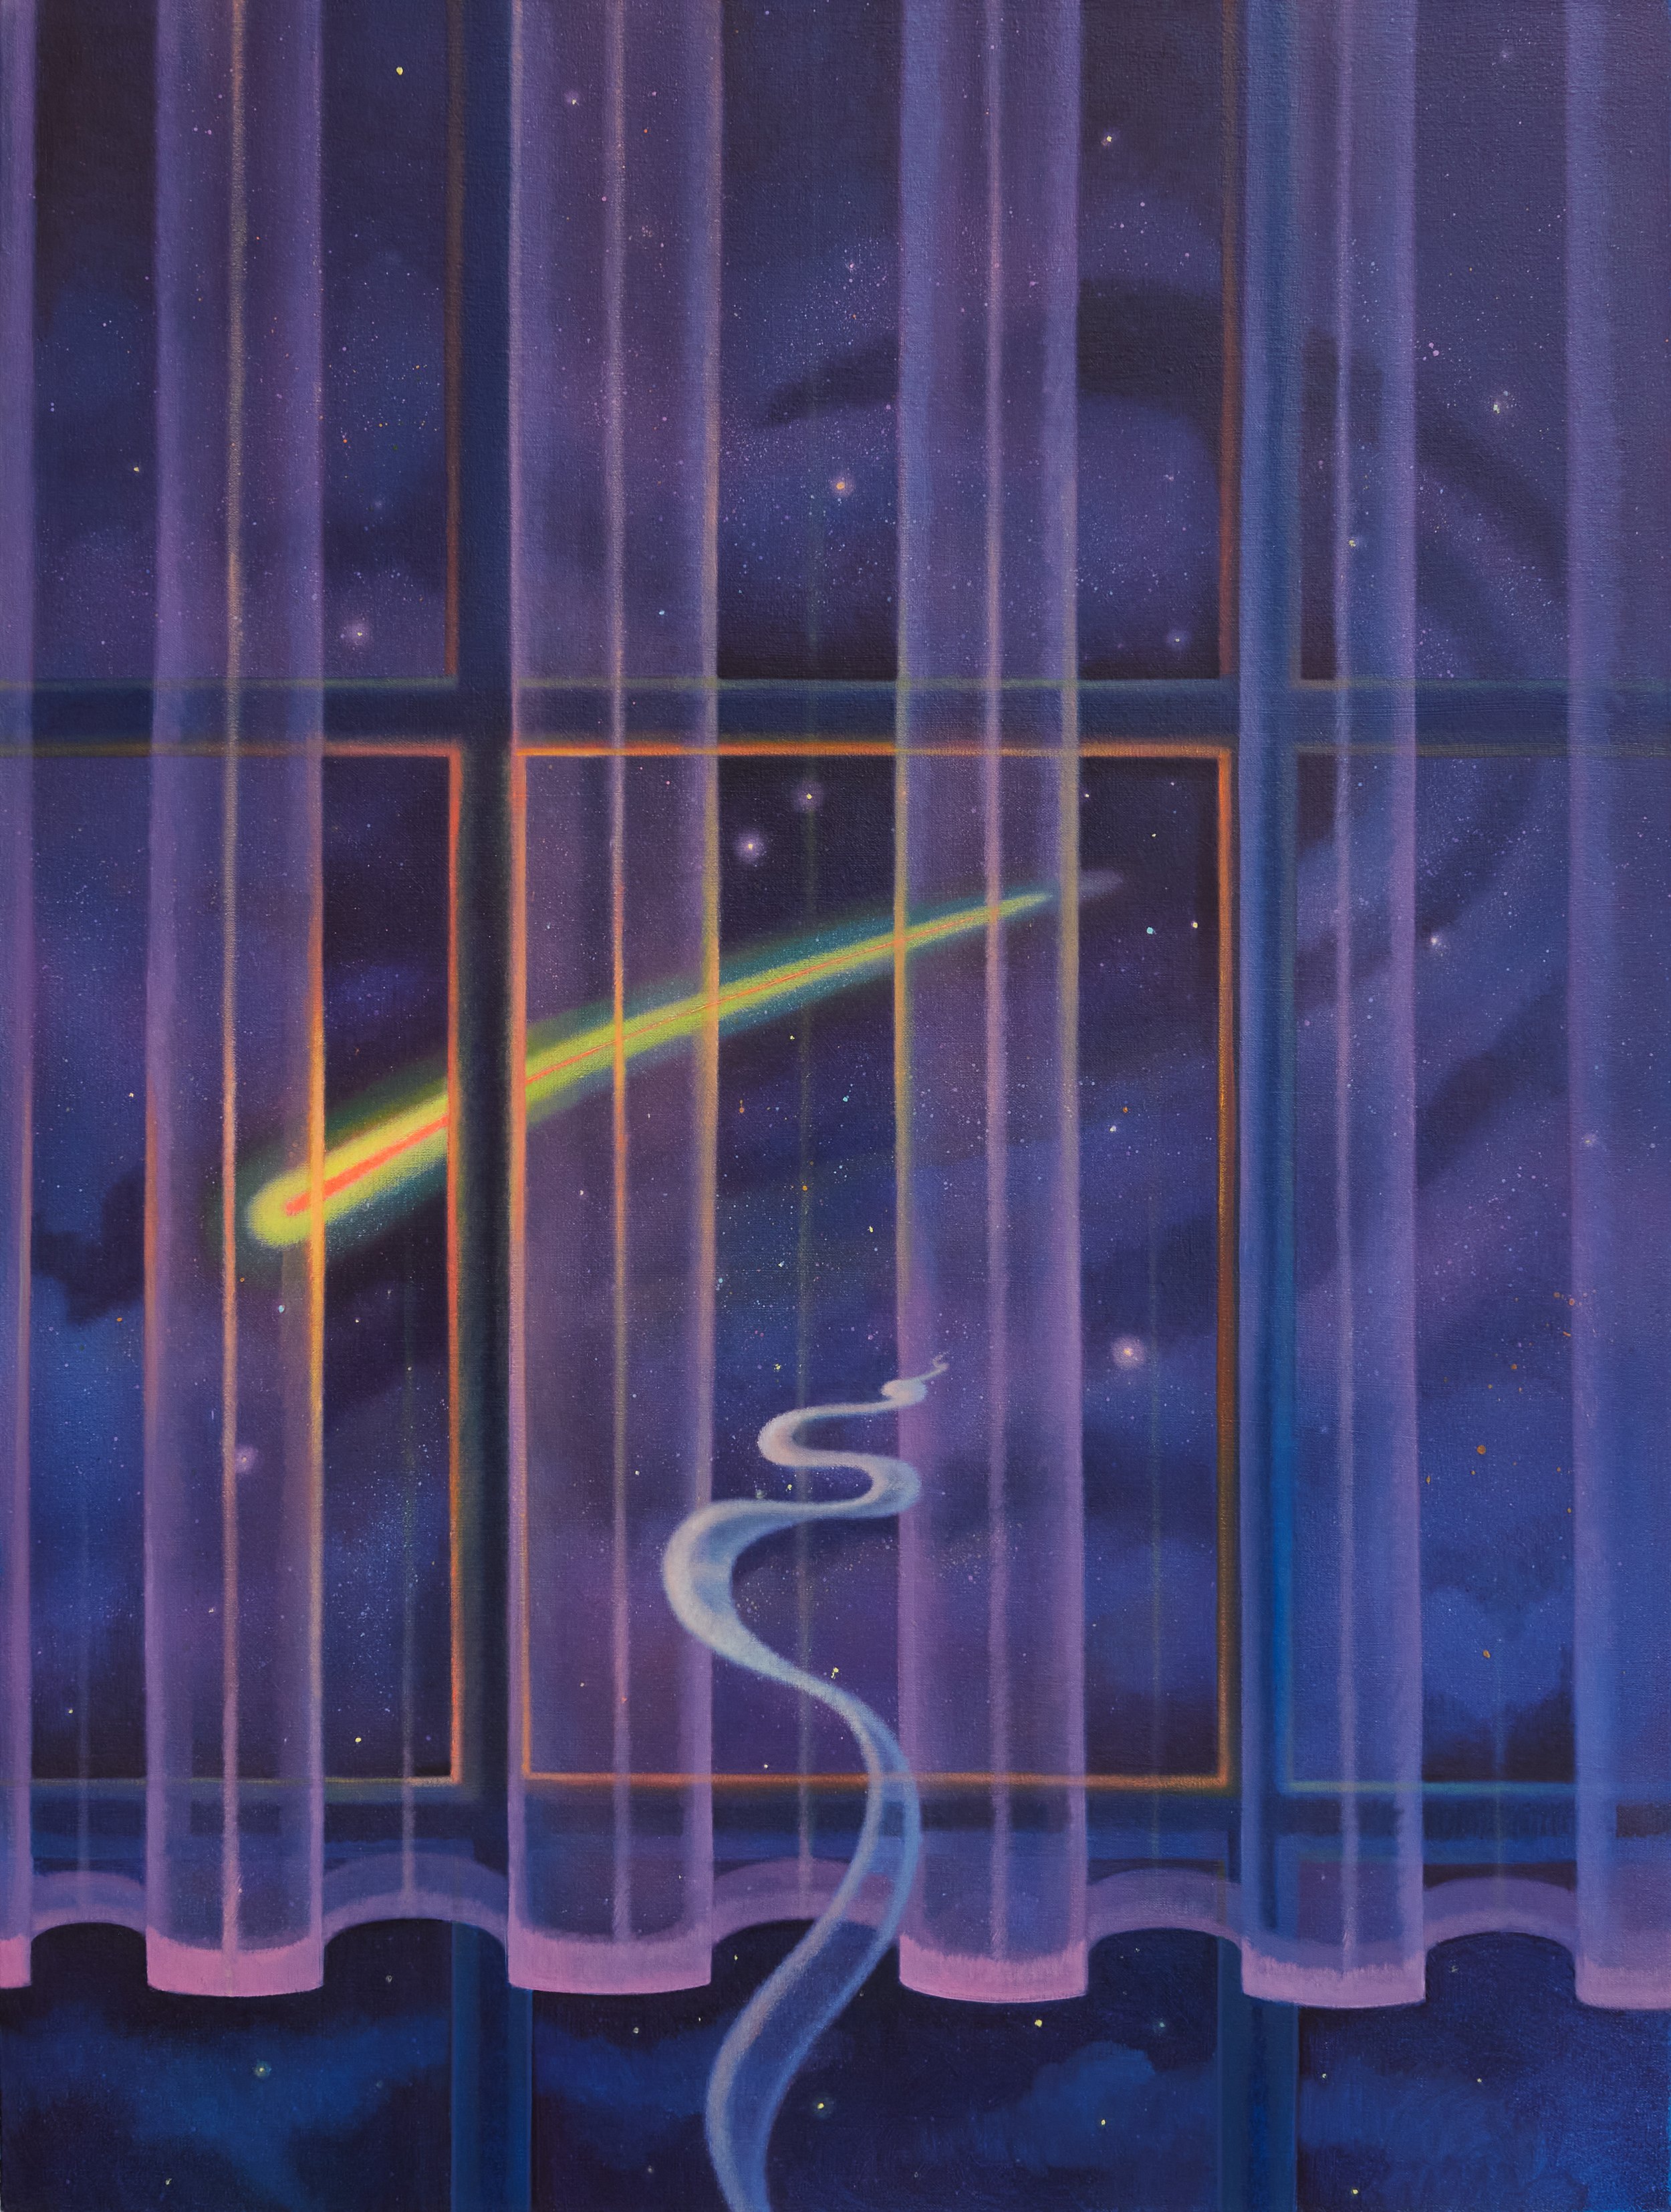 Shooting Star, oil and acrylic on canvas, 40" x 30", 2022